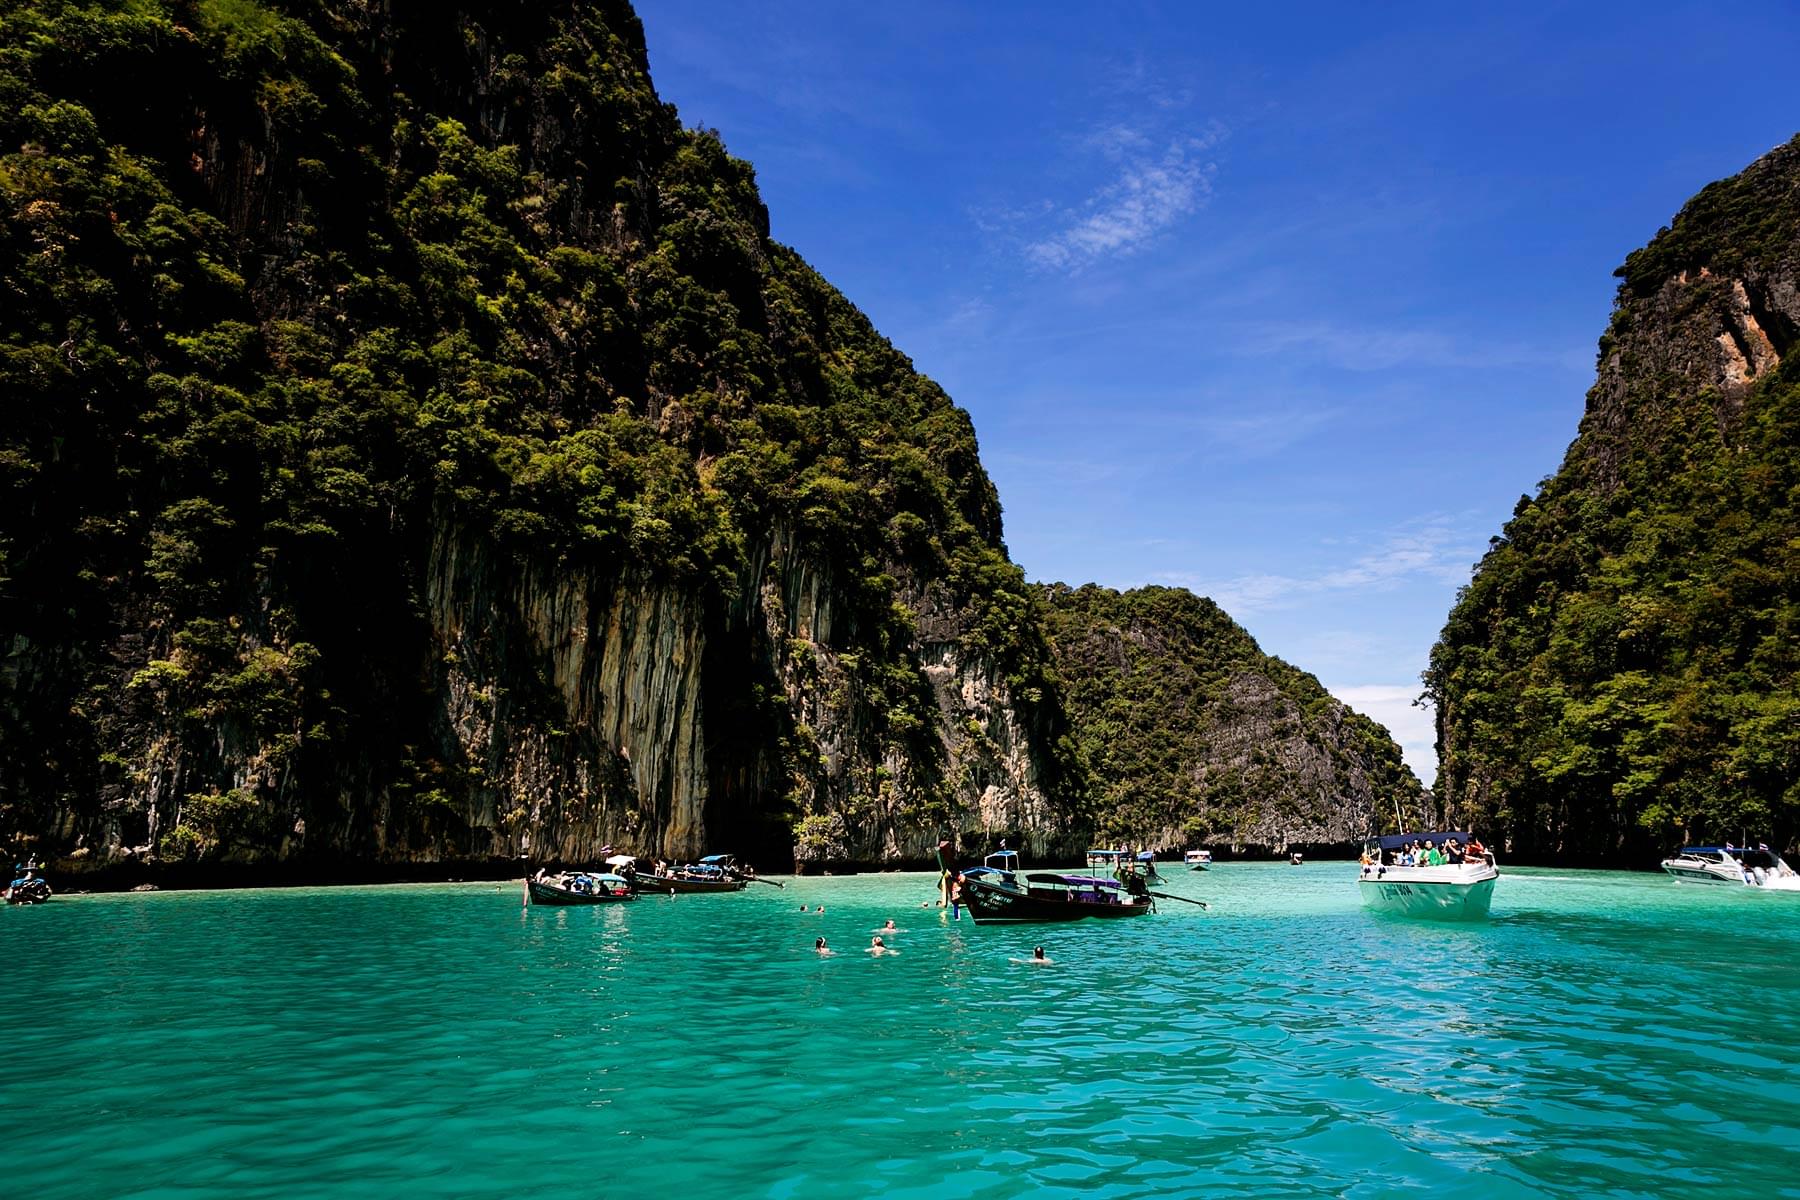 Have an amazing picturesque experience at the Phi Phi islands tour